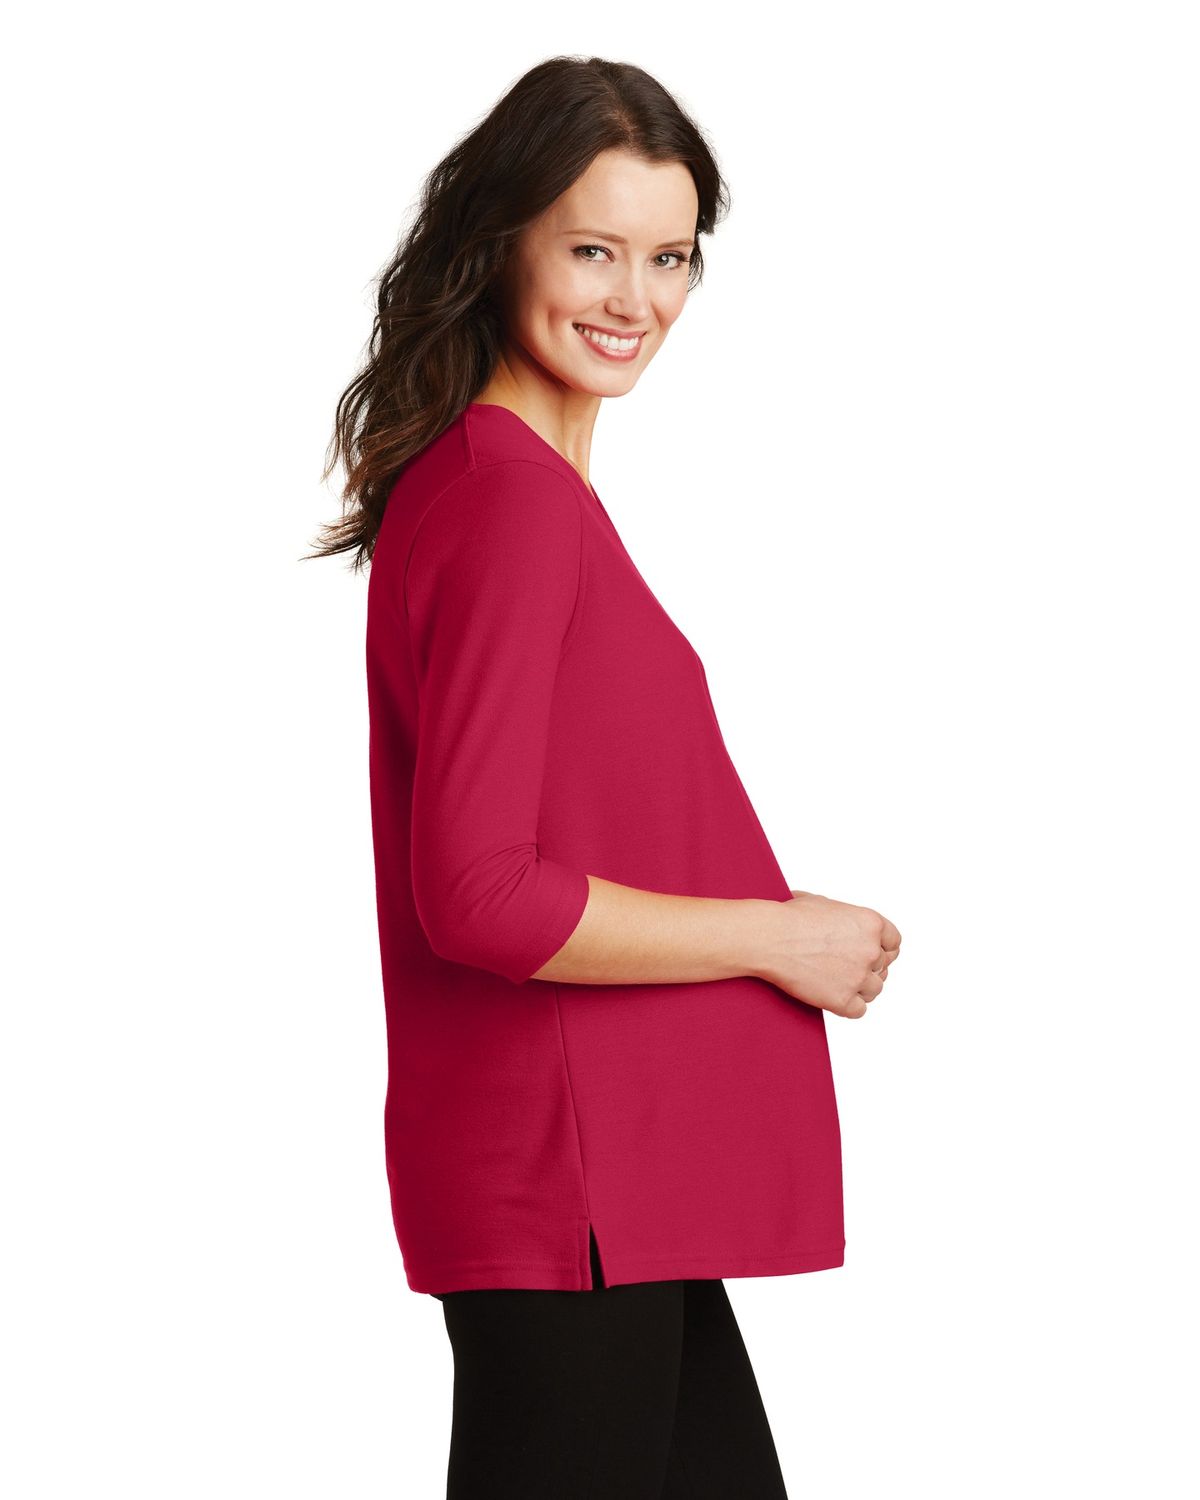 'Port Authority L561M Ladies Silk Touch Maternity 3/4-Sleeve V-Neck Shirt'